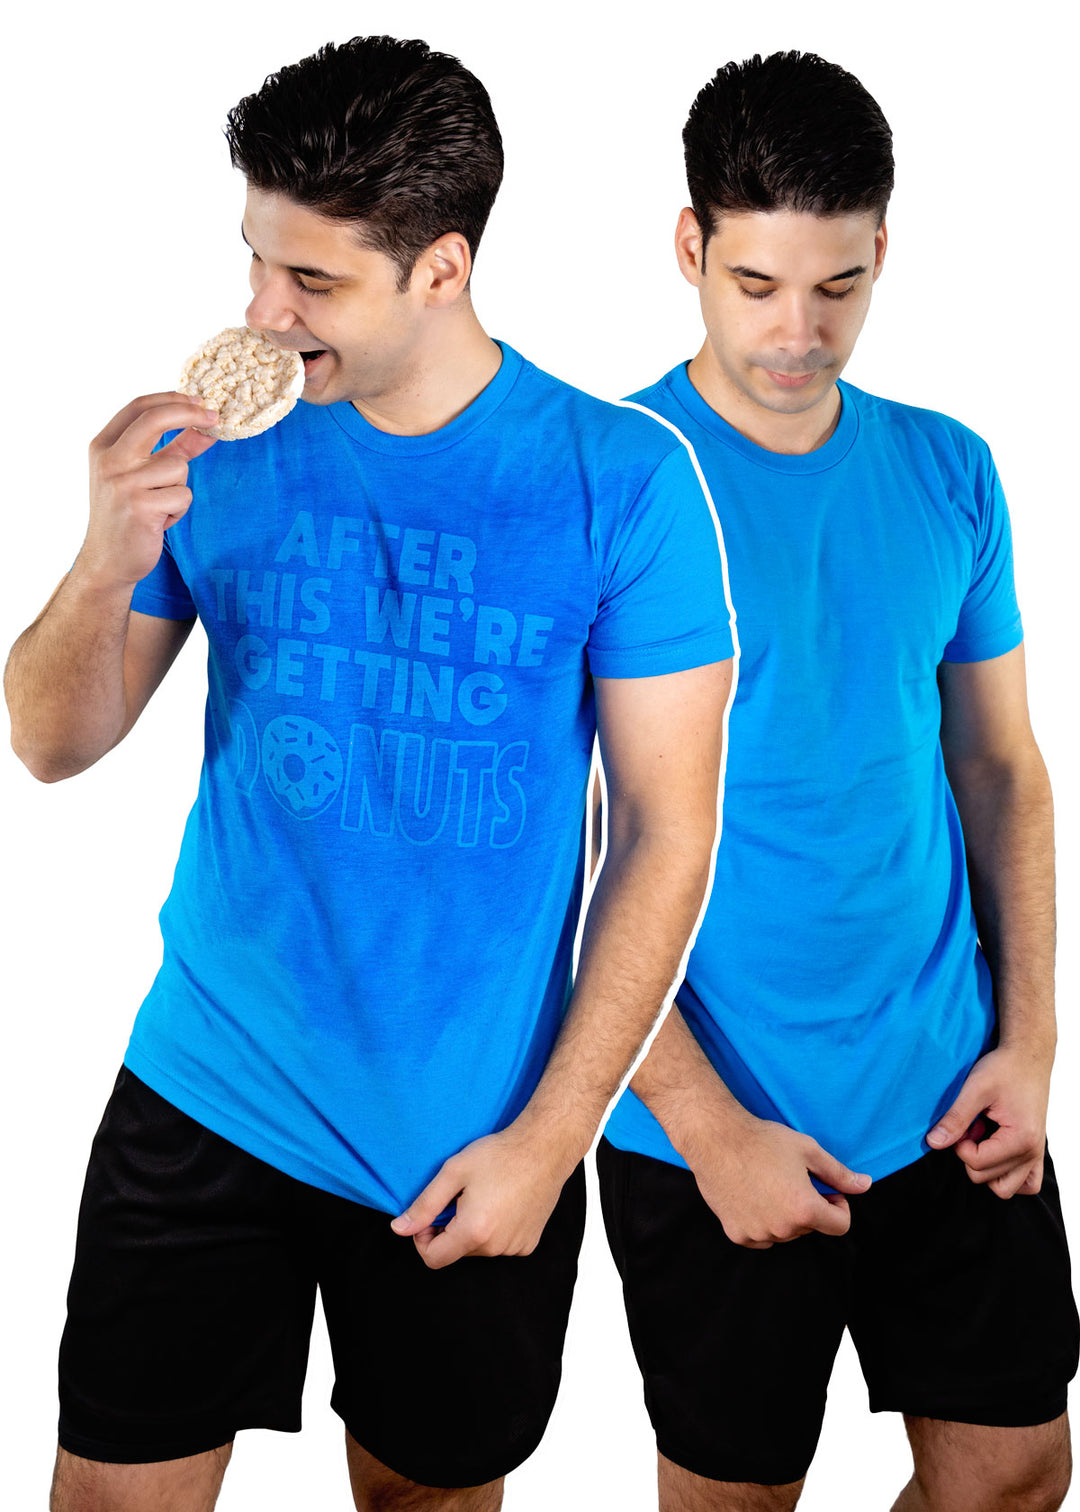 Sweat Activated Men's Gym Shirt  Workout Complete - Gifteee Un